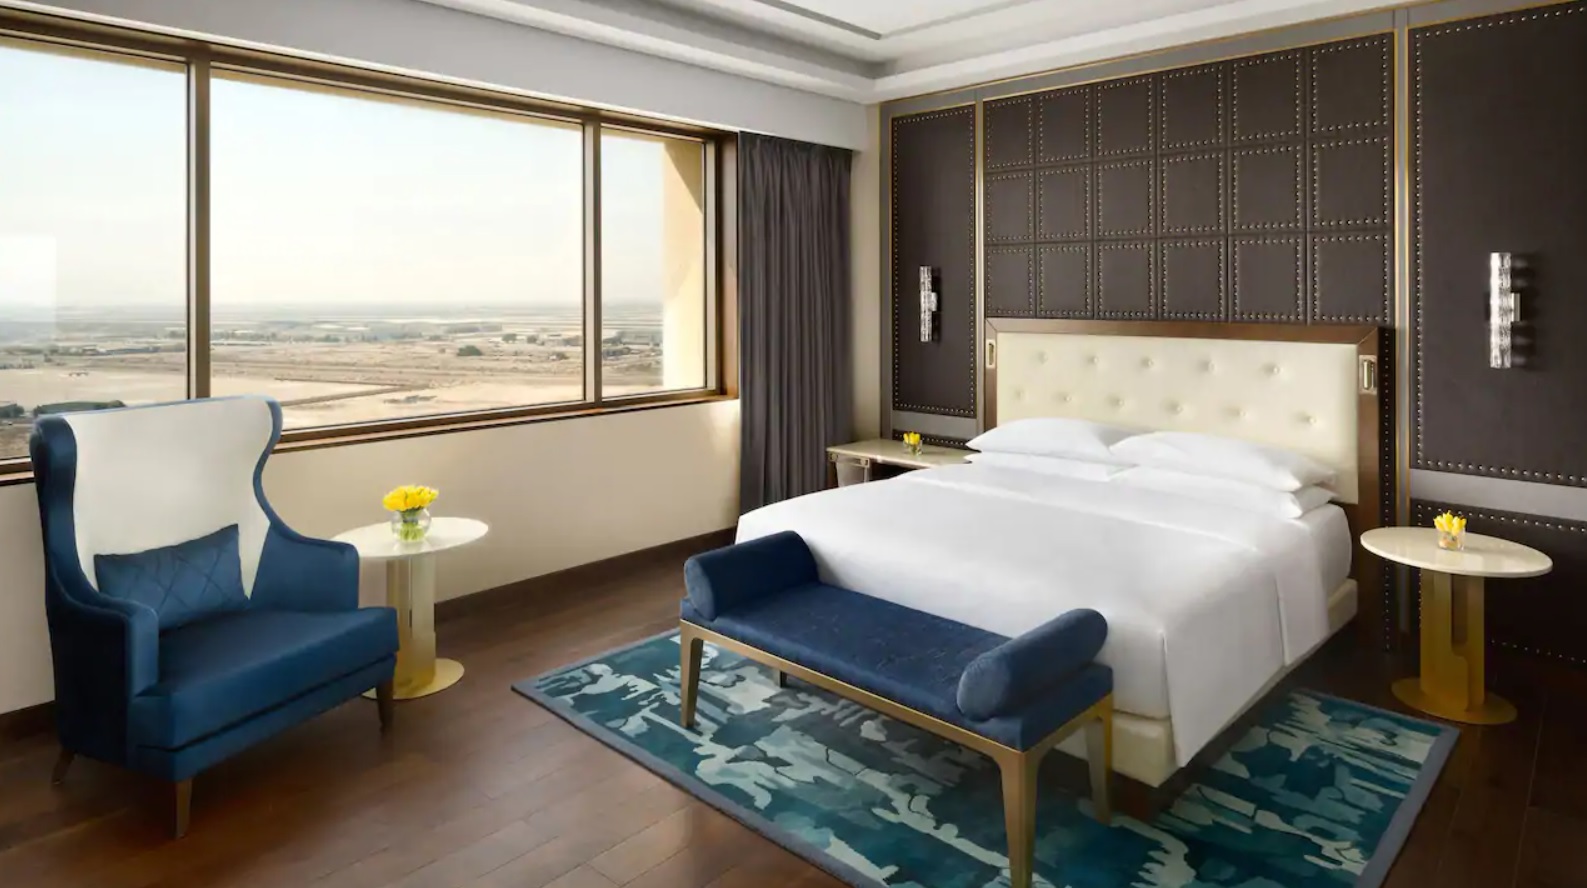 Bedroom of the 138 sqm Diplomat Suite at the recently opened Grand Hyatt Al Khobar Hotel and Residences. Click to enlarge.